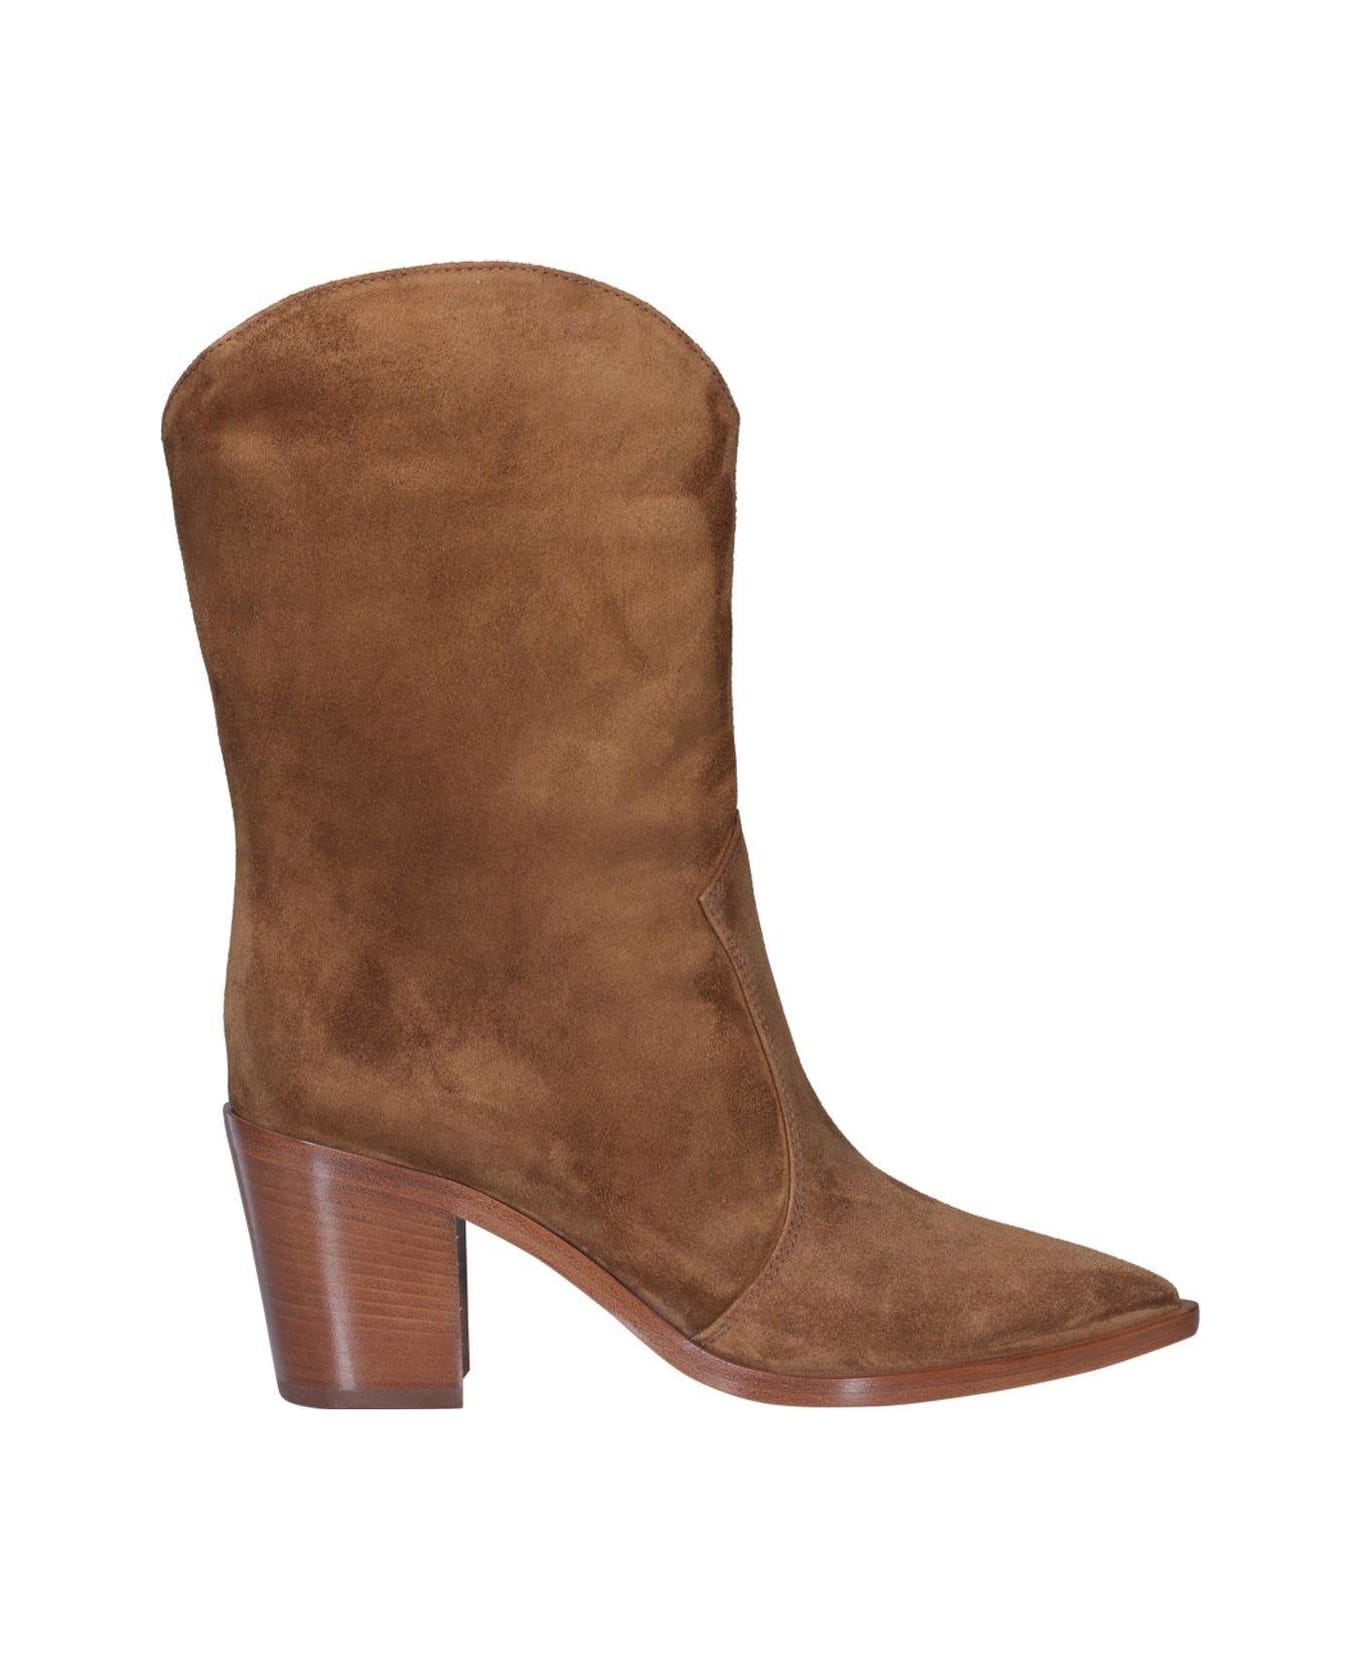 Gianvito Rossi Denver Pointed-toe Boots - TEXAS